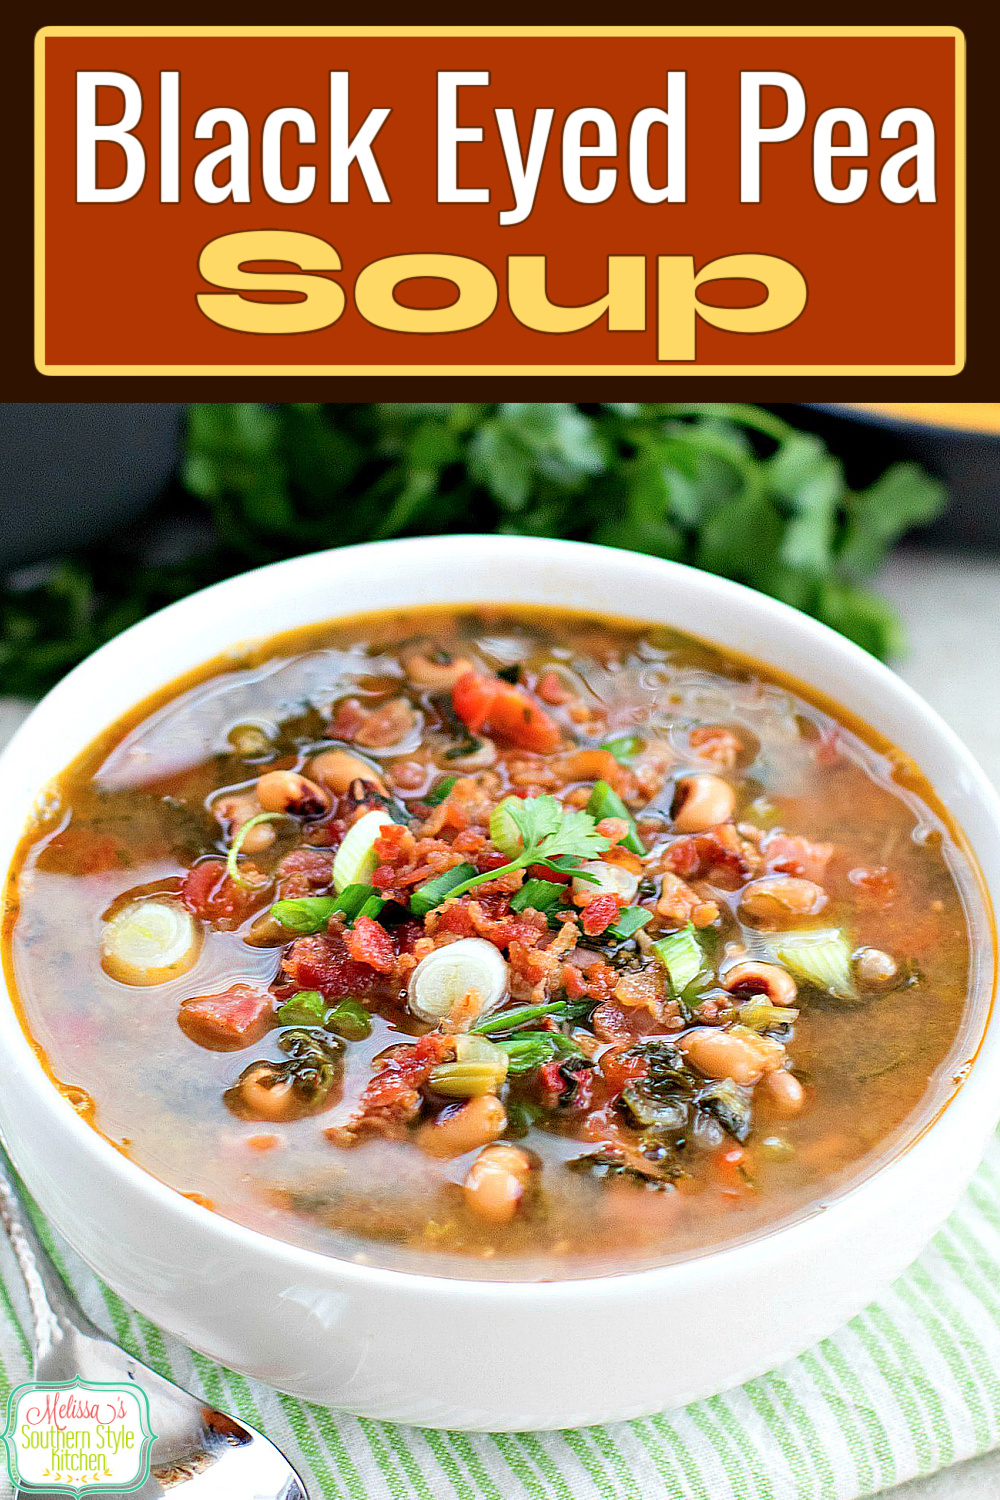 Enjoy a warm and cozy bowl of Black Eyed Pea Soup for your New Year's Day celebration #blackeyedpeas #soup #blackeyedpeasoup #souprecipes #bestsouprecipes #newyearsdayrecipes #southernfood #southernrecipes #dinner #dinnerrecipes via @melissasssk